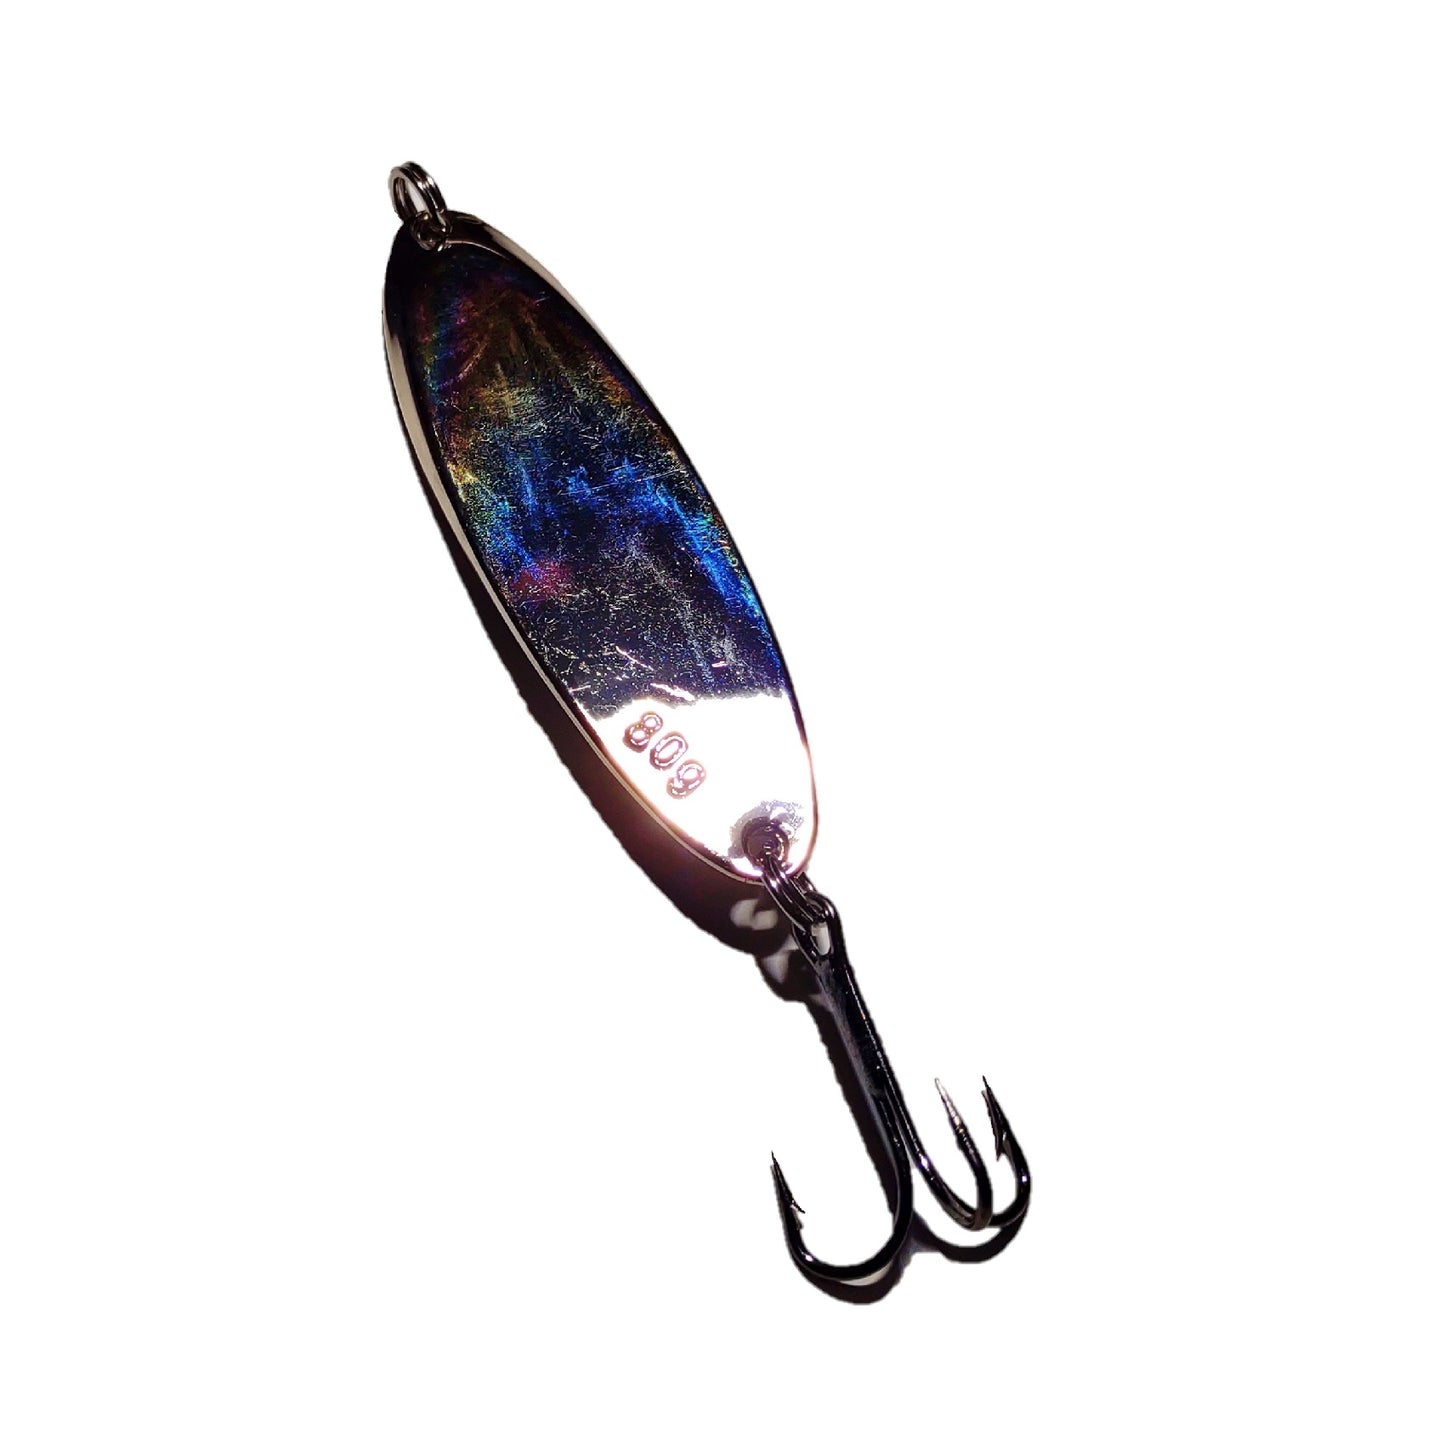 Casting-King Spoon with a Treble Hook 3oz